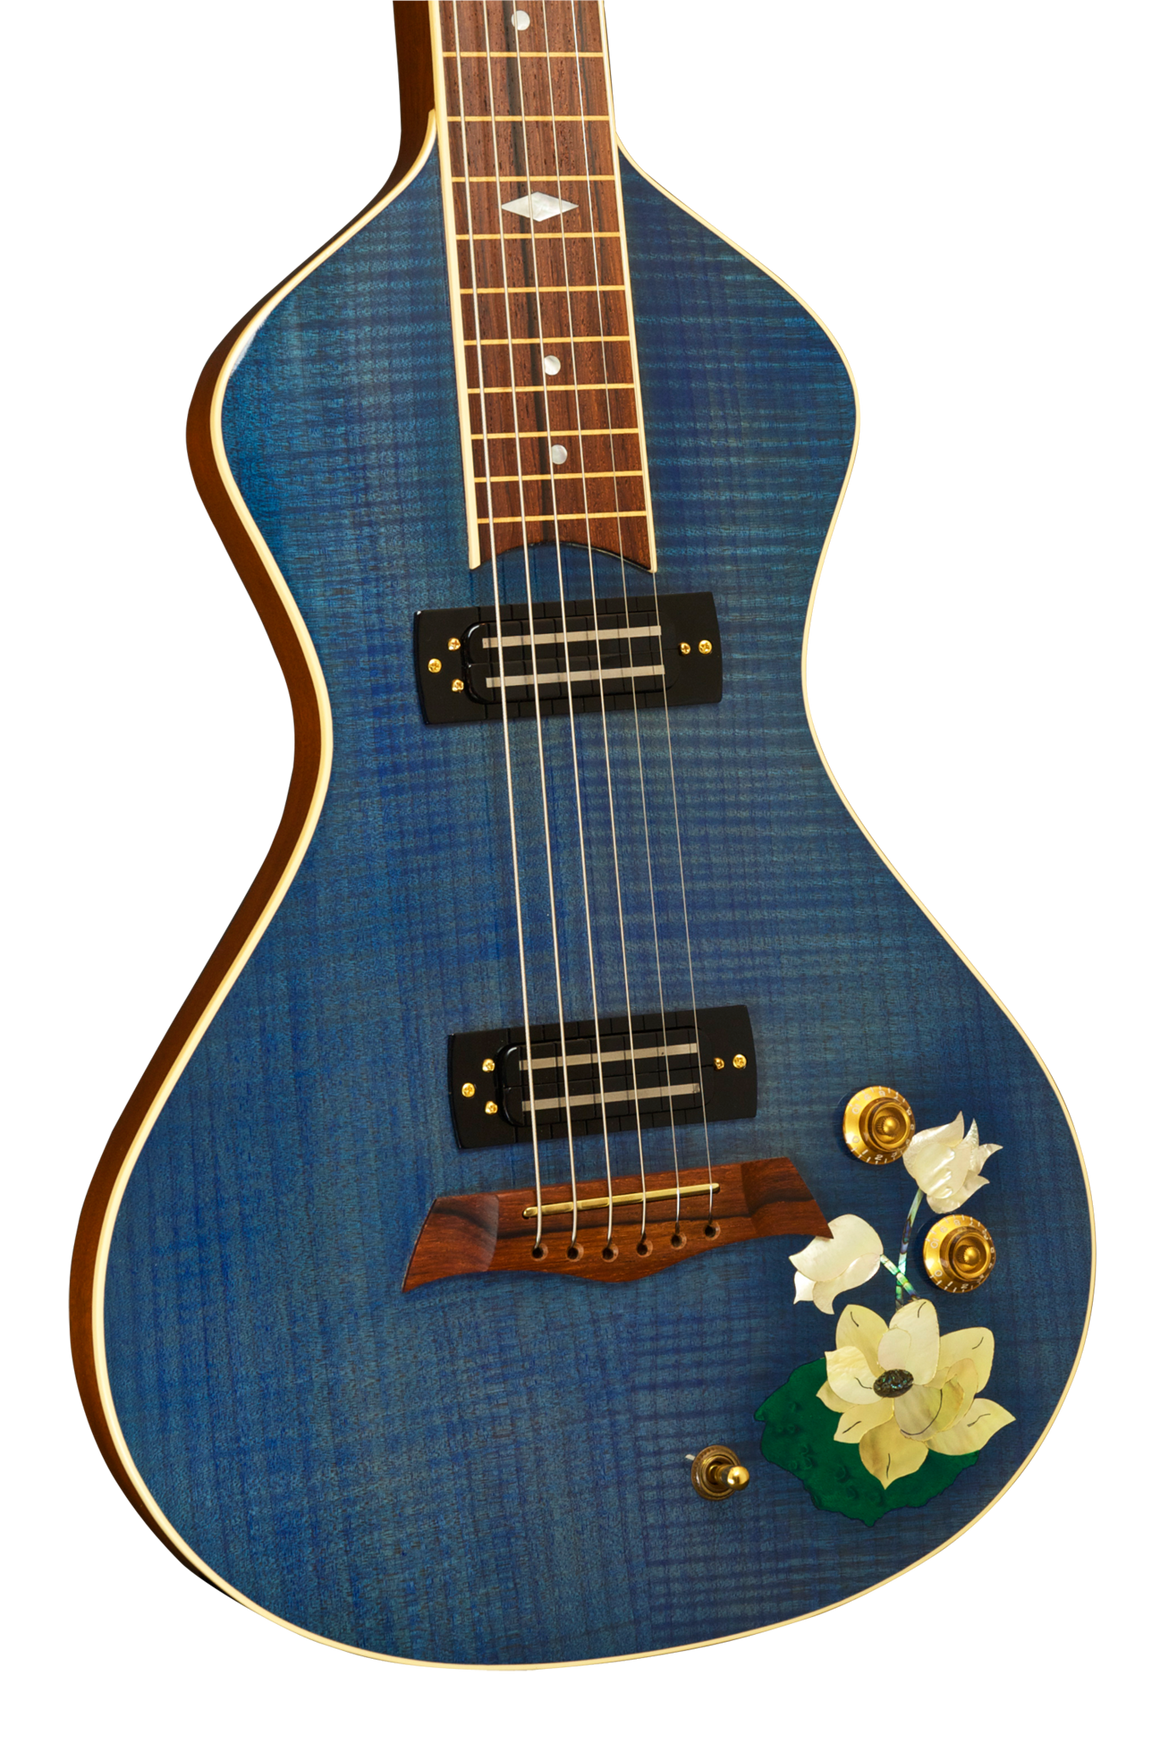 SOLD Rare Asher 2005 "Lotus Flower" #1 of 1 Electro Hawaiian Model I Lap Steel w/ Custom Hand Cut Inlay - Great Condition